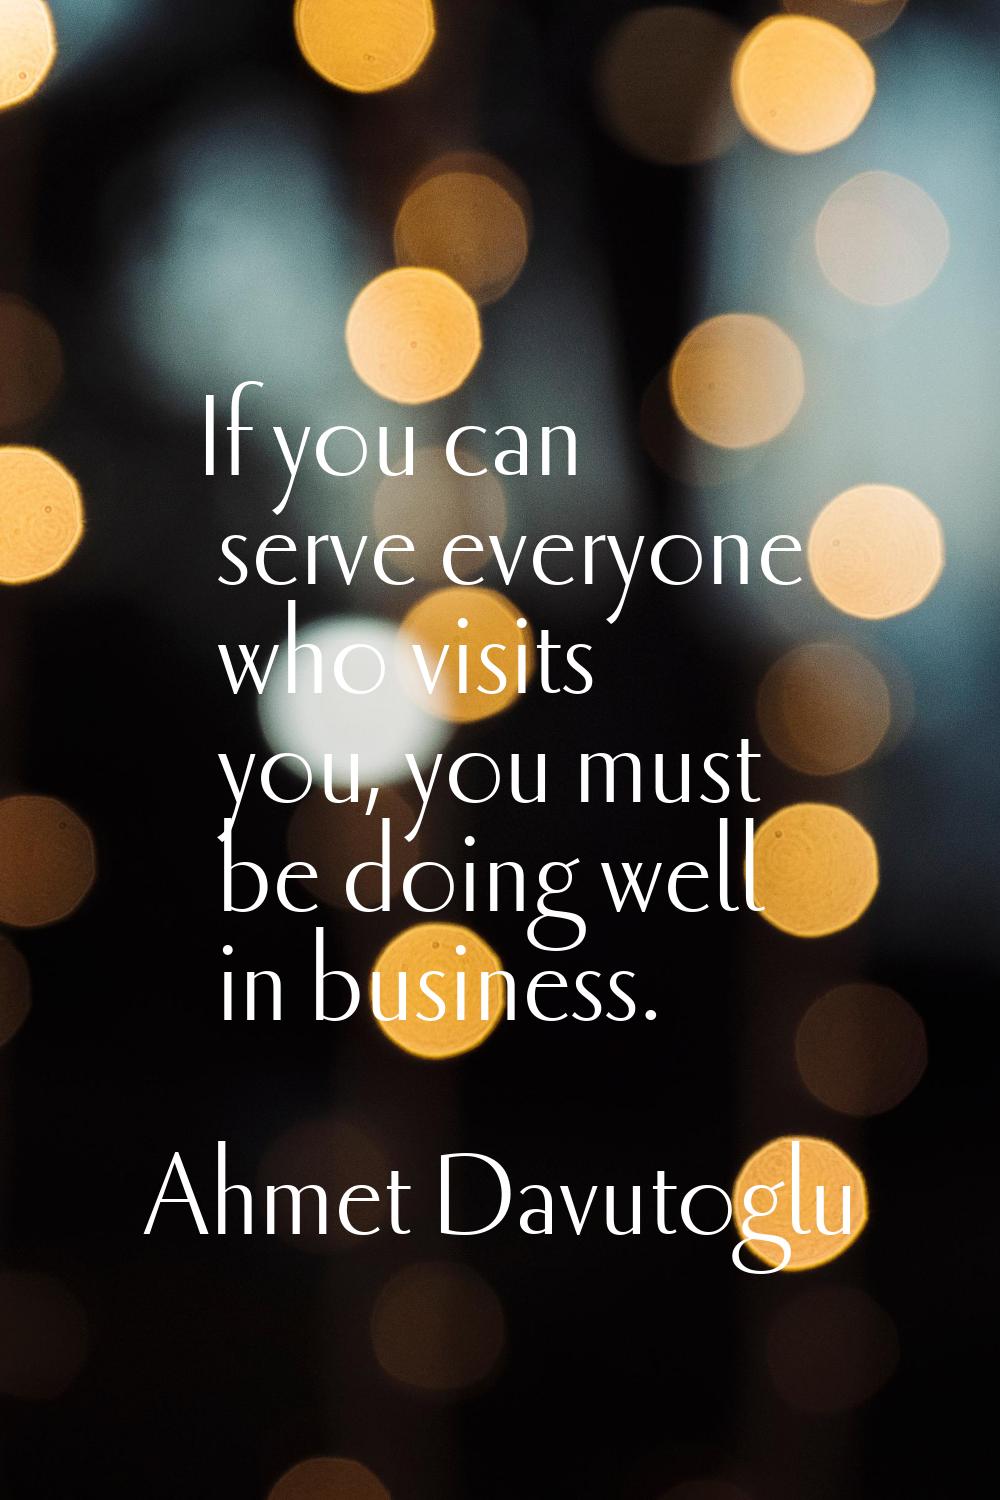 If you can serve everyone who visits you, you must be doing well in business.